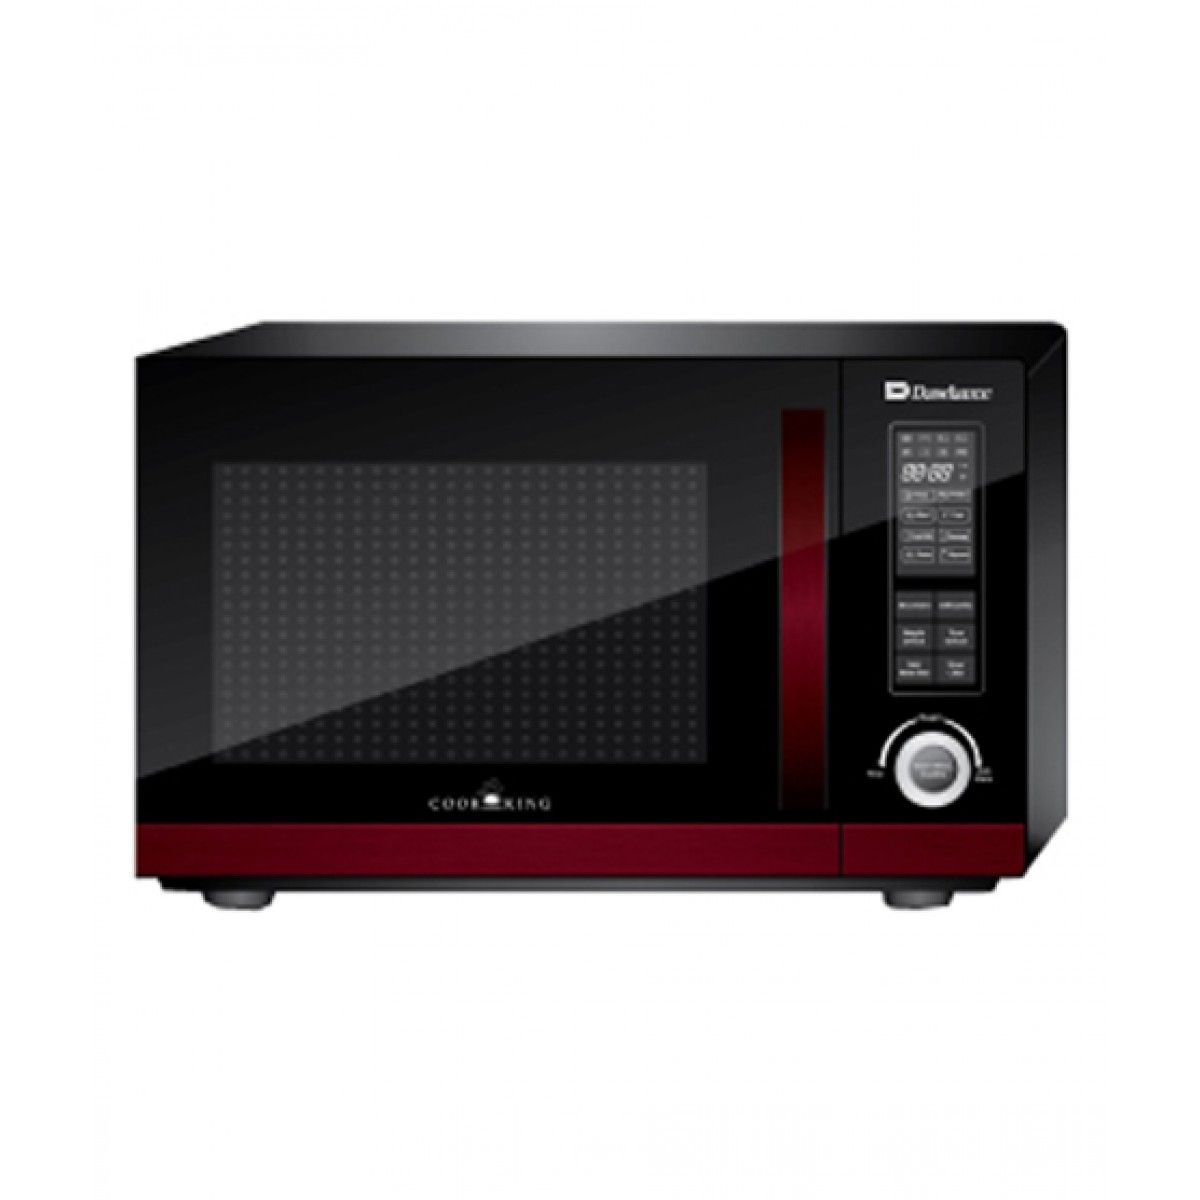 DAWLANCE DW-133G 30 Ltr MICROWAVE OVEN